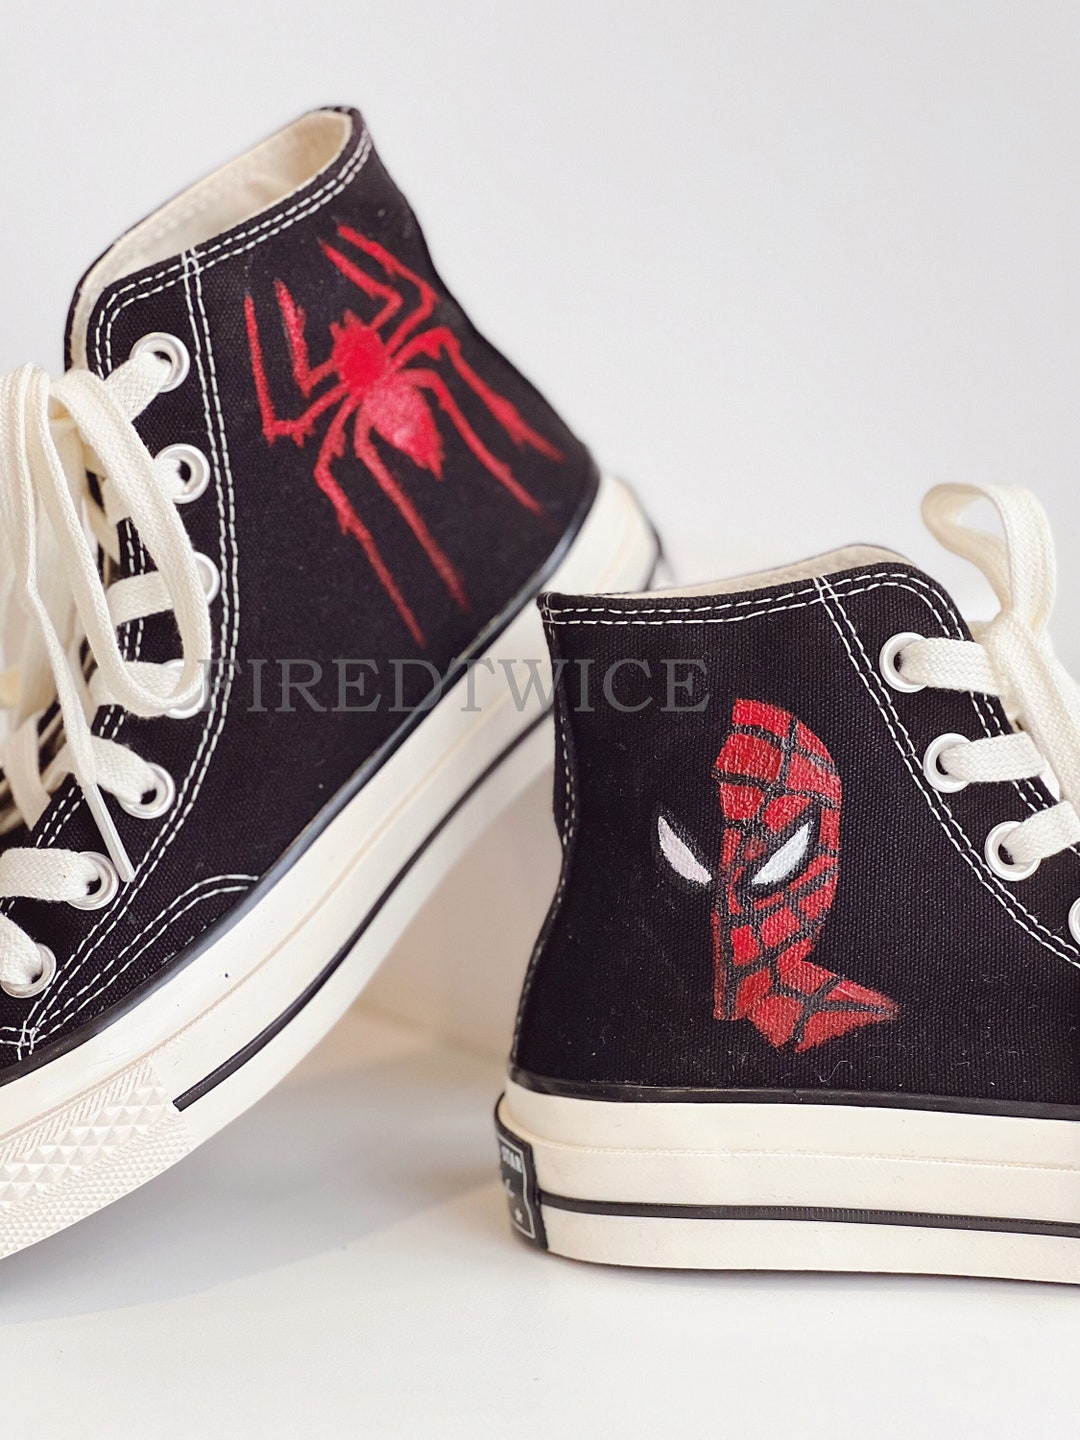 Spider Man Converse Painted Shoes Spider Mask Painting Shoes - Etsy